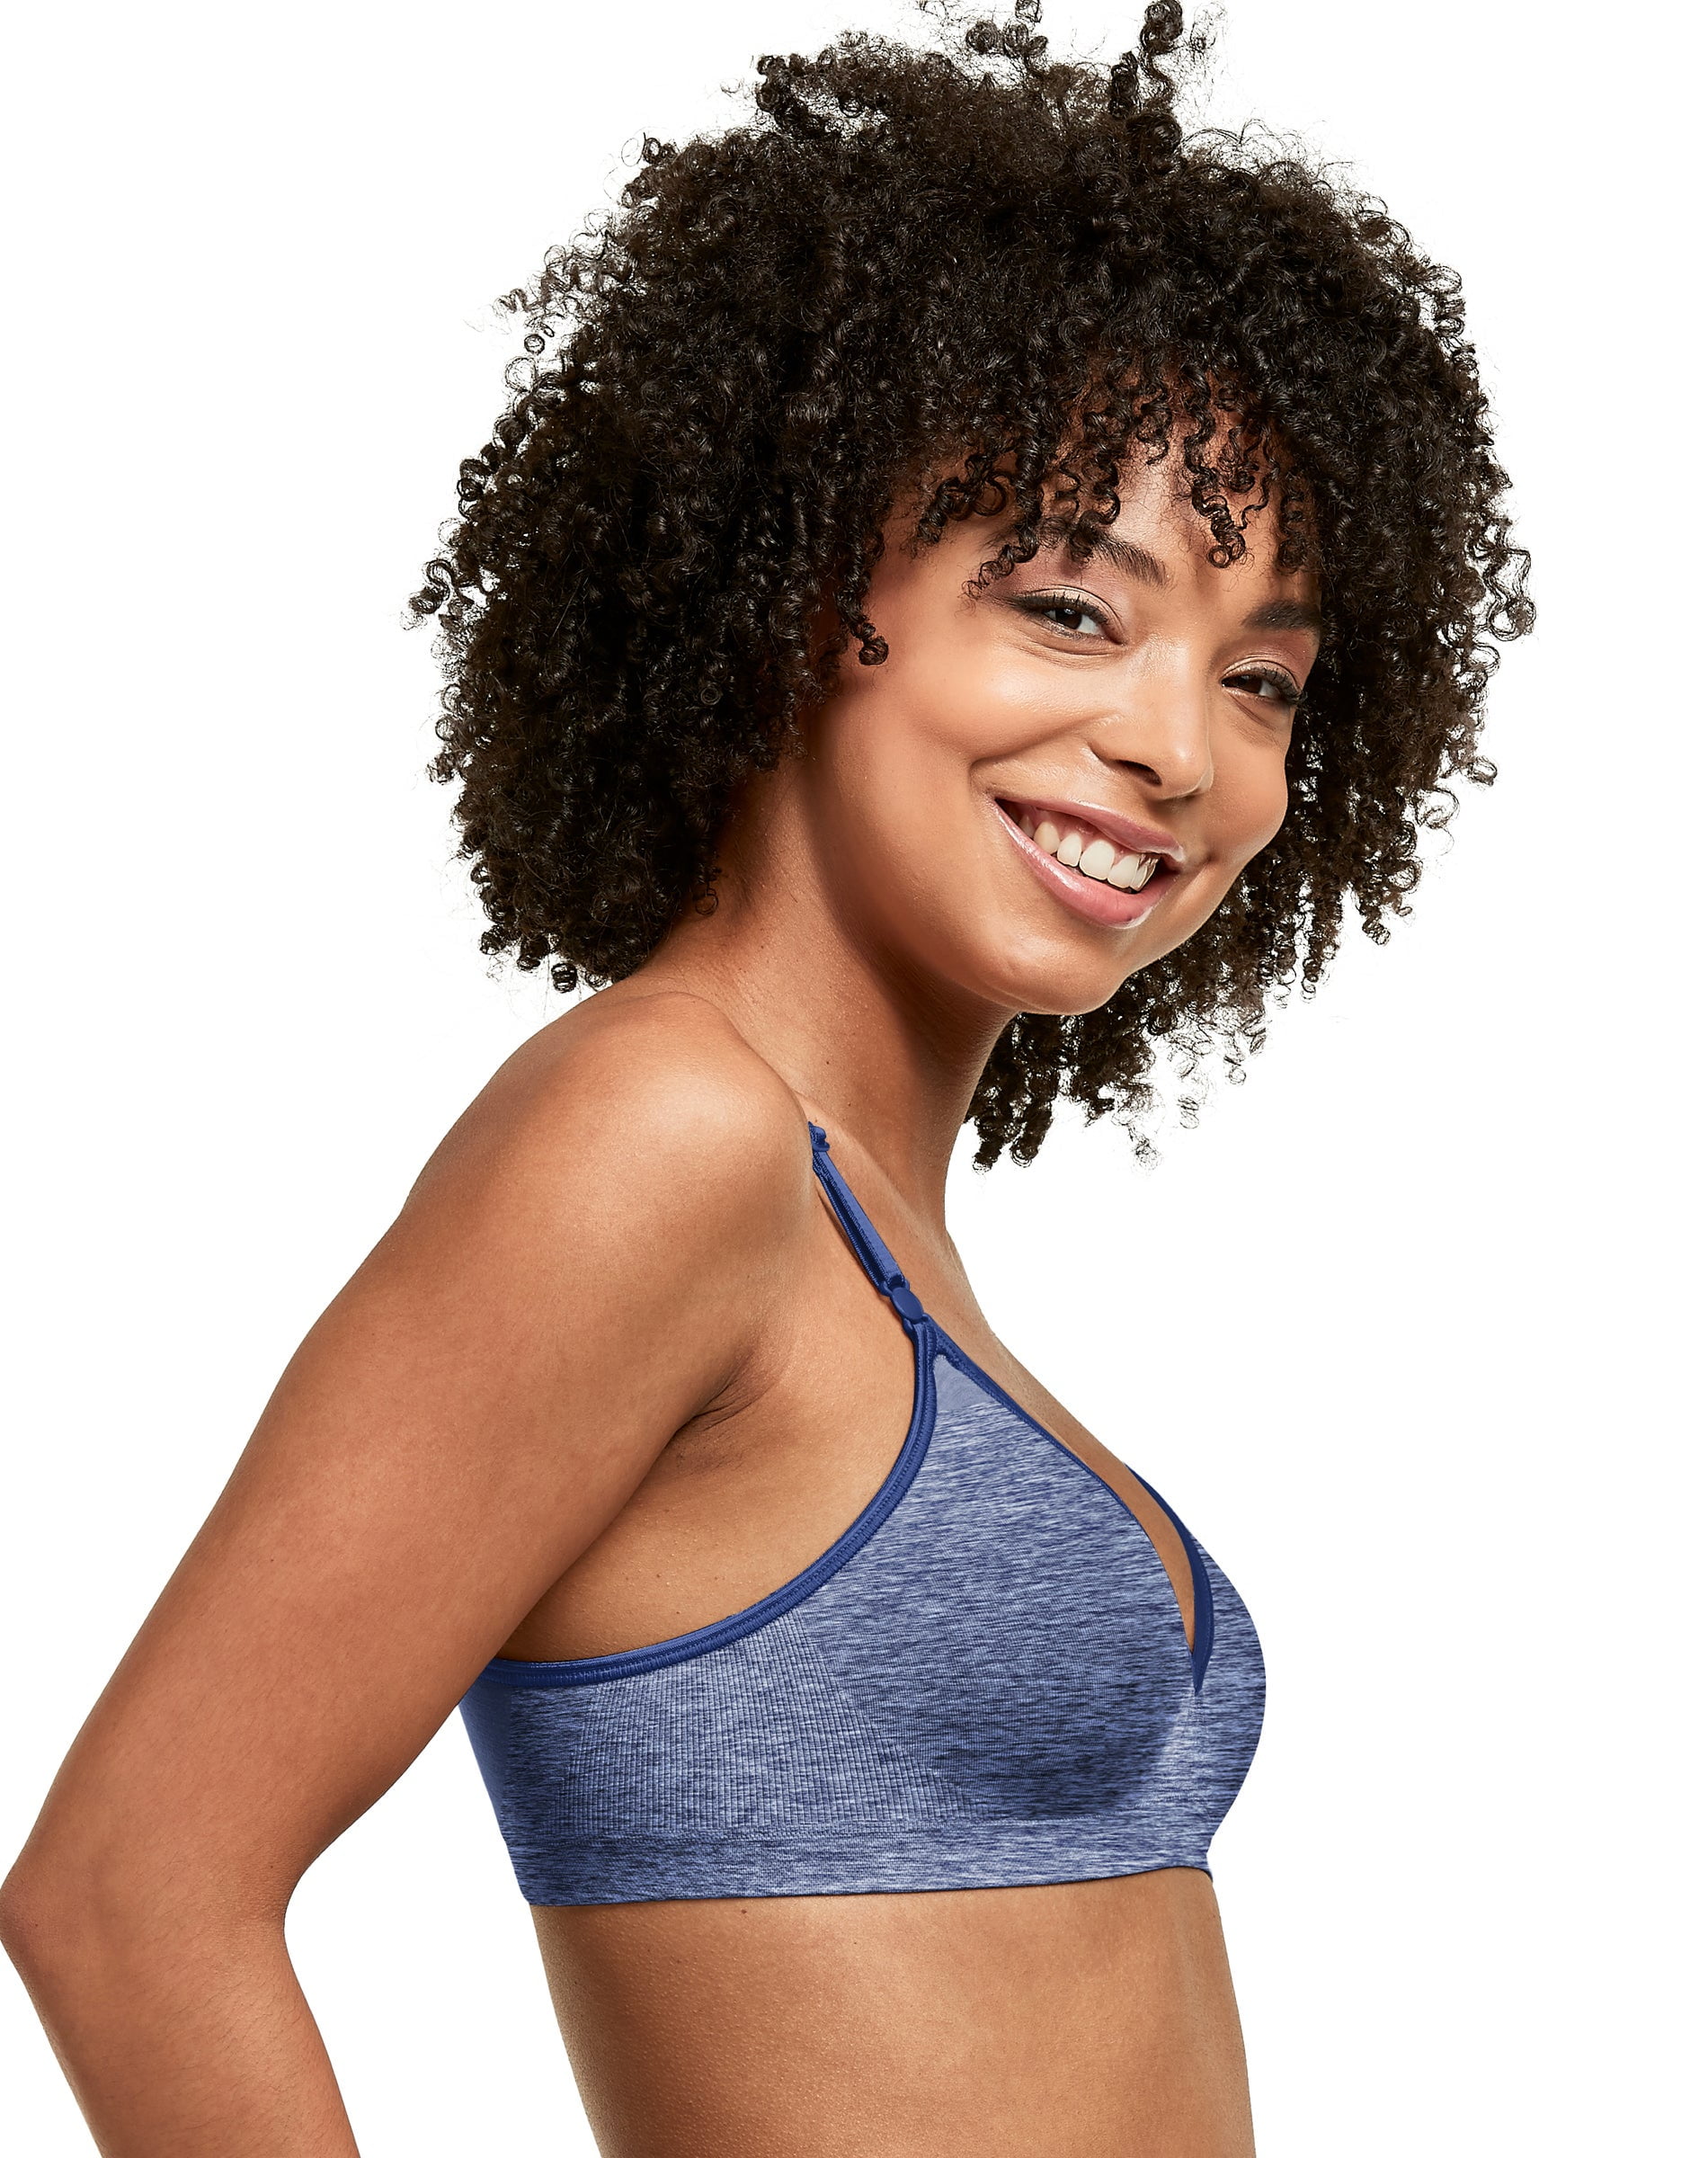 Hanes Womens Comfy Support Wirefree Mhg795 Bras, Nude Heather, Medium Us -  Imported Products from USA - iBhejo